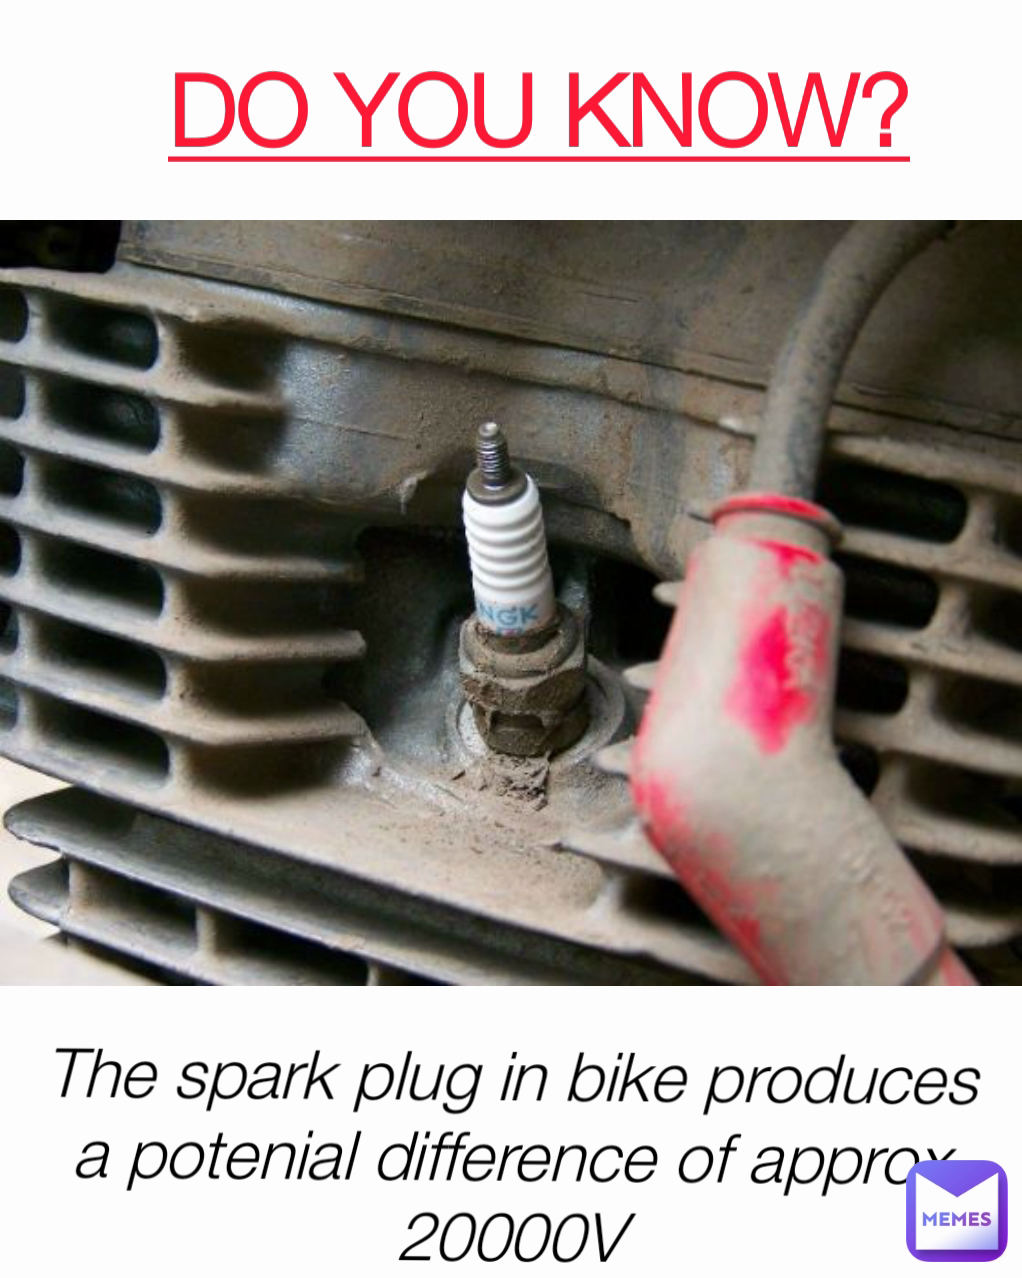 DO YOU KNOW? The spark plug in bike produces a potenial difference of approx 20000V